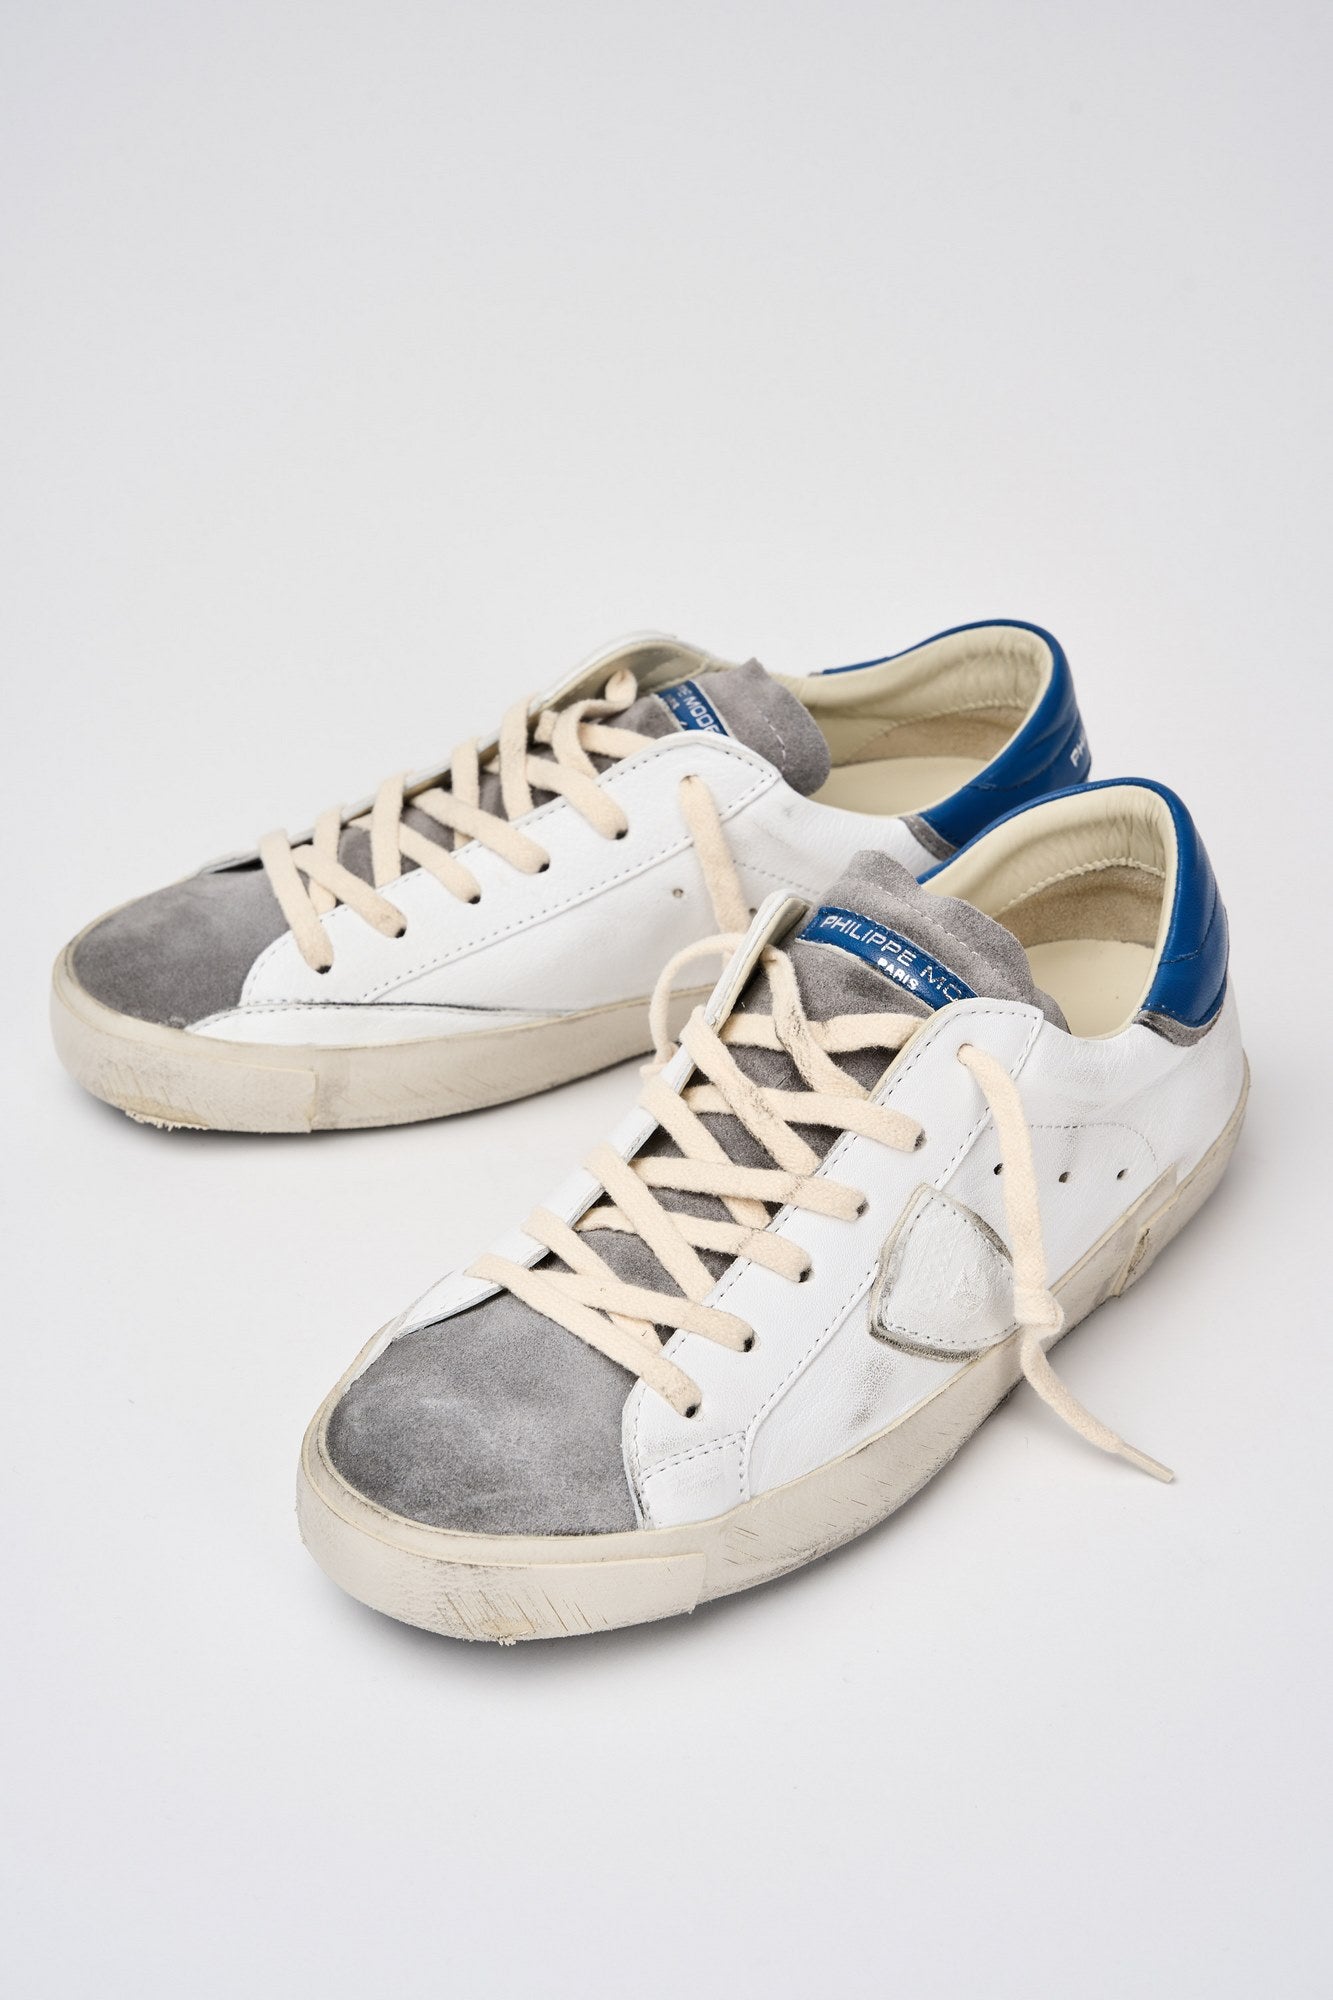 Philippe Model Sneaker Prsx Leather/Suede White/Blue-7